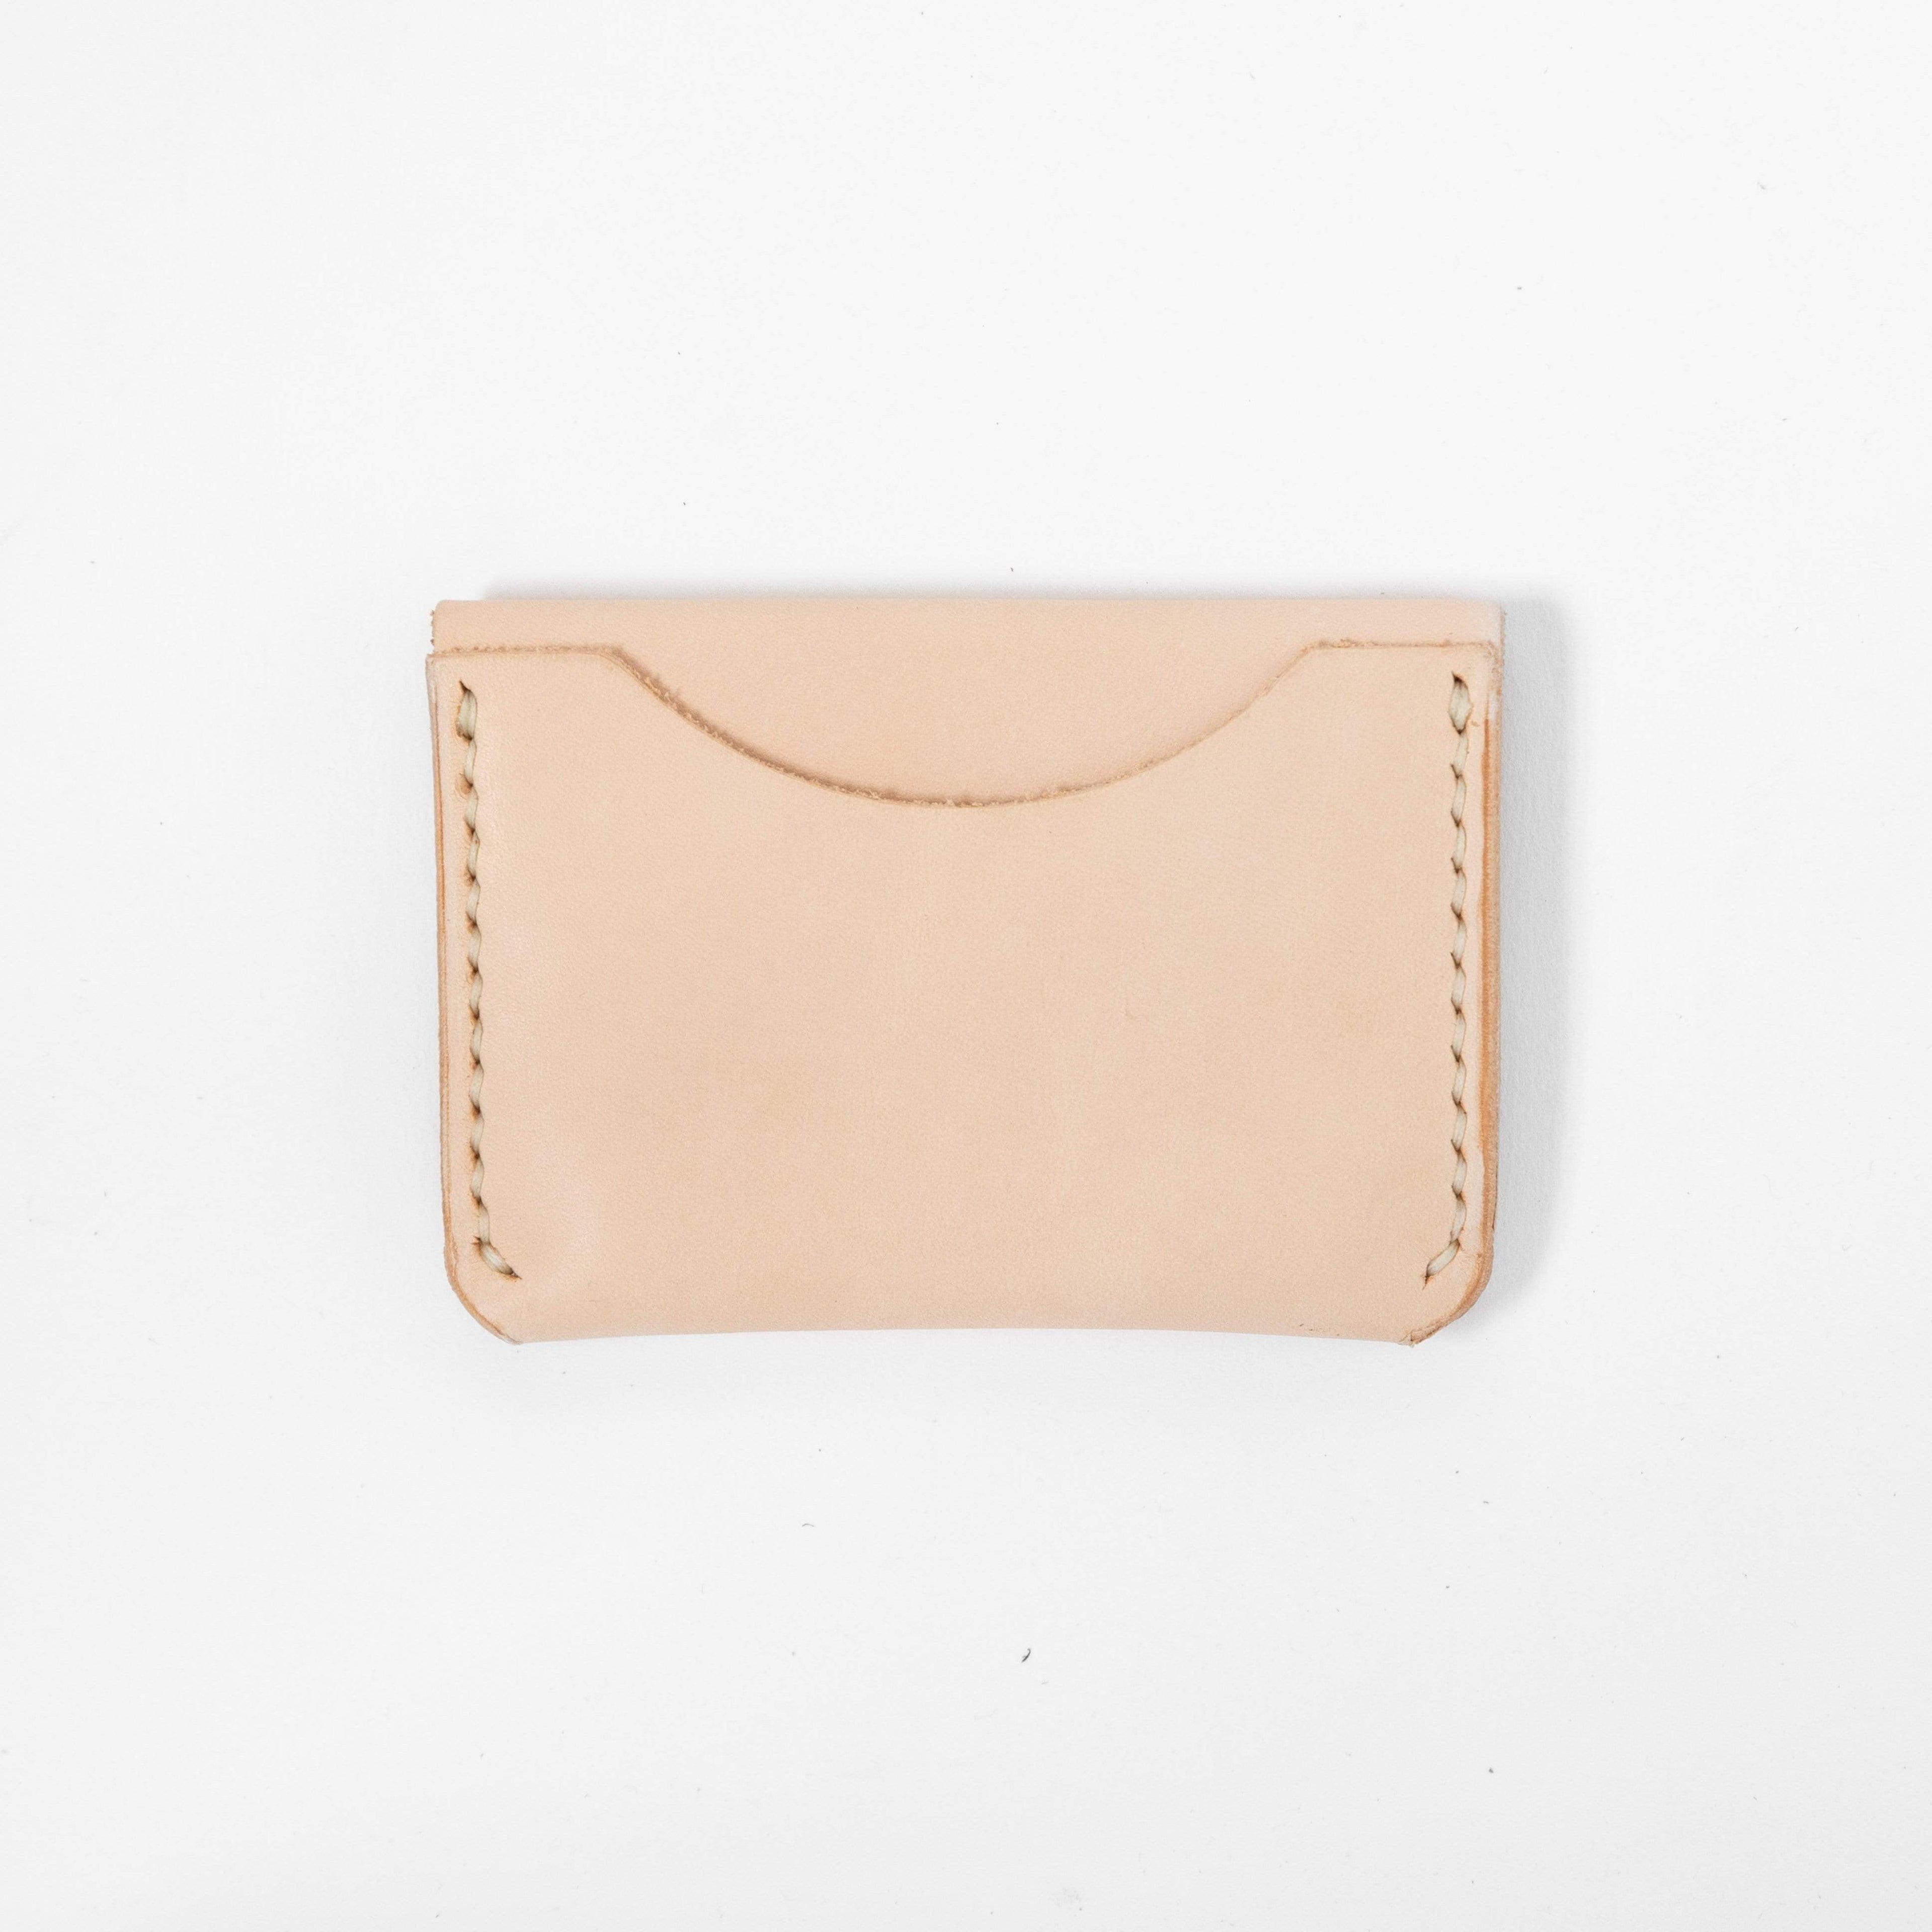 Vegetable Tan Flap Wallet- mens leather wallet - handmade leather wallets at KMM &amp; Co.